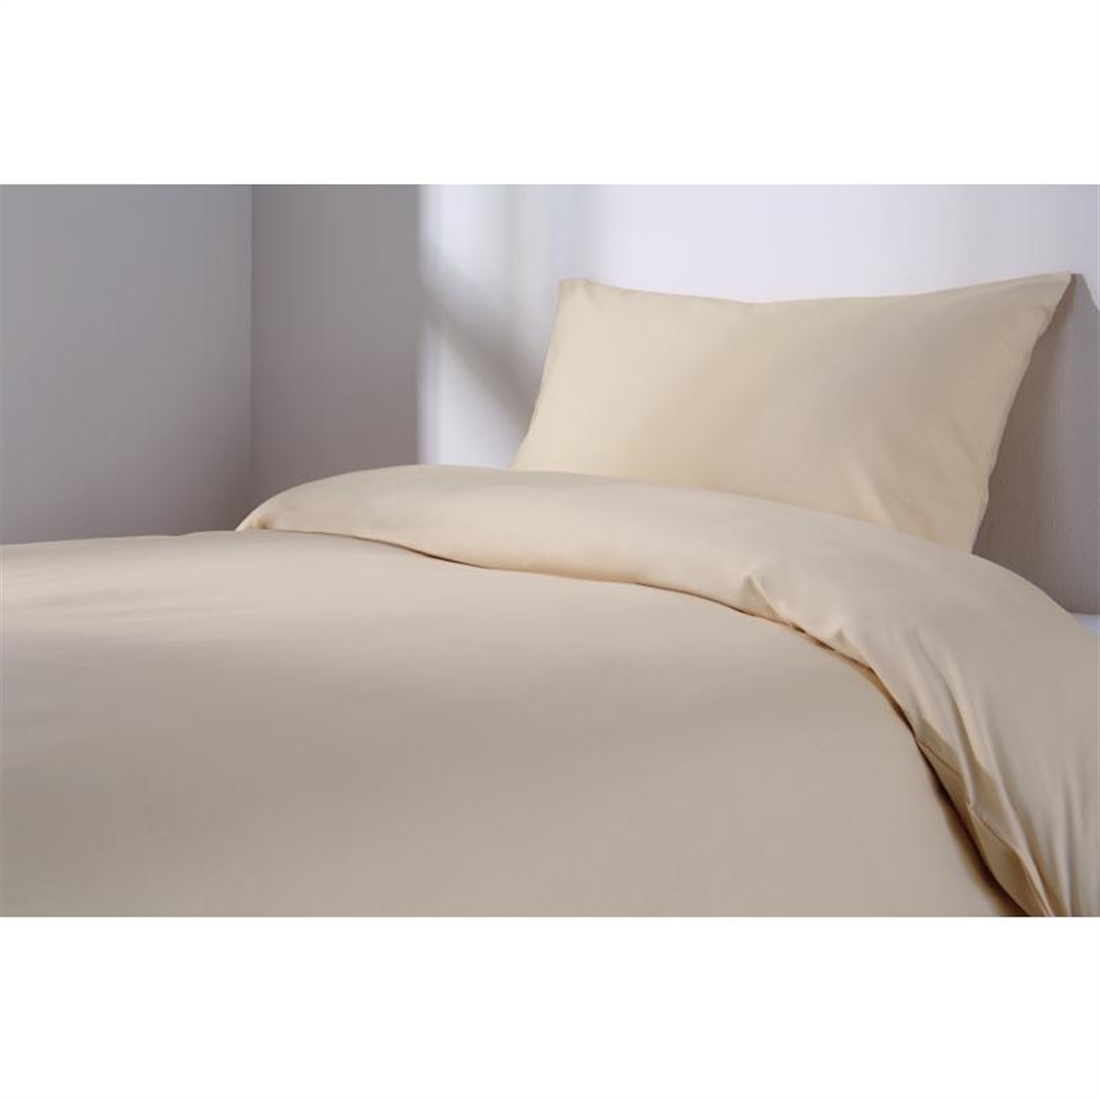 Mitre Essentials Spectrum Fitted Sheet Oatmeal Small Double